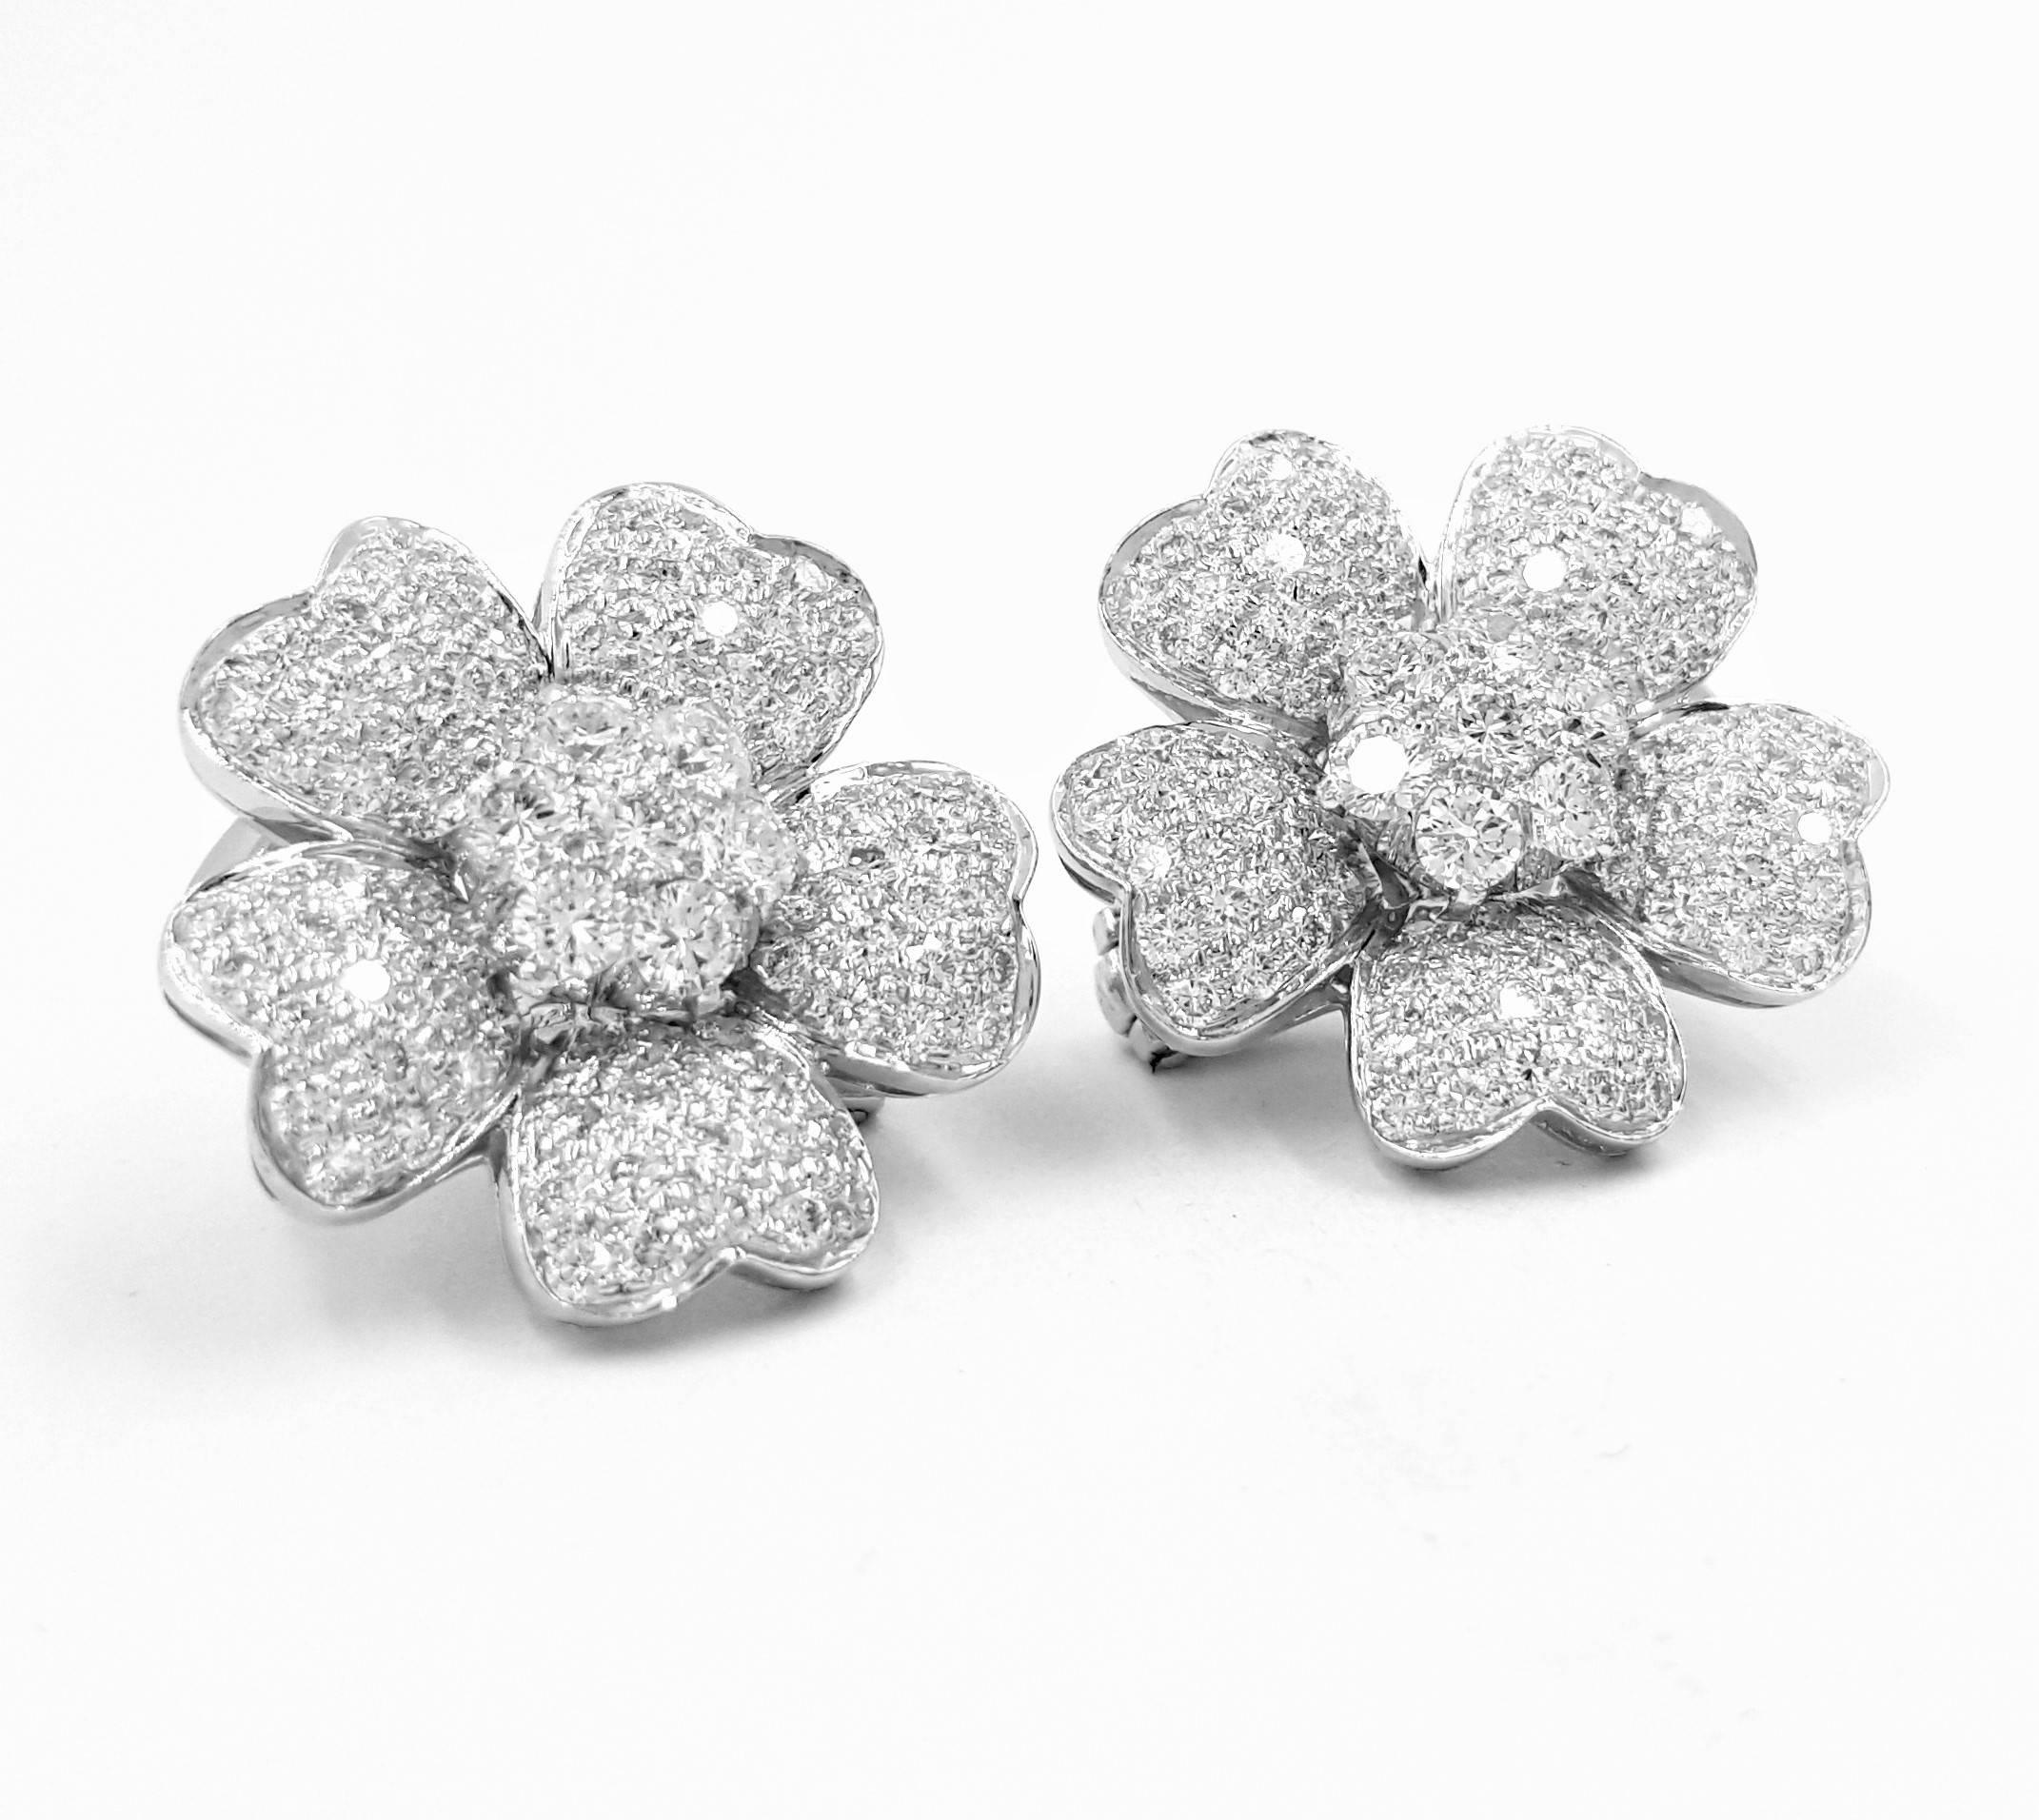 This gorgeous pair of 5.00 carats of diamond flower earrings will be the focal point of any outfit and are being offered at a great price for this weekend only! In excellent condition, these breathtaking flowers are made with 100% guaranteed